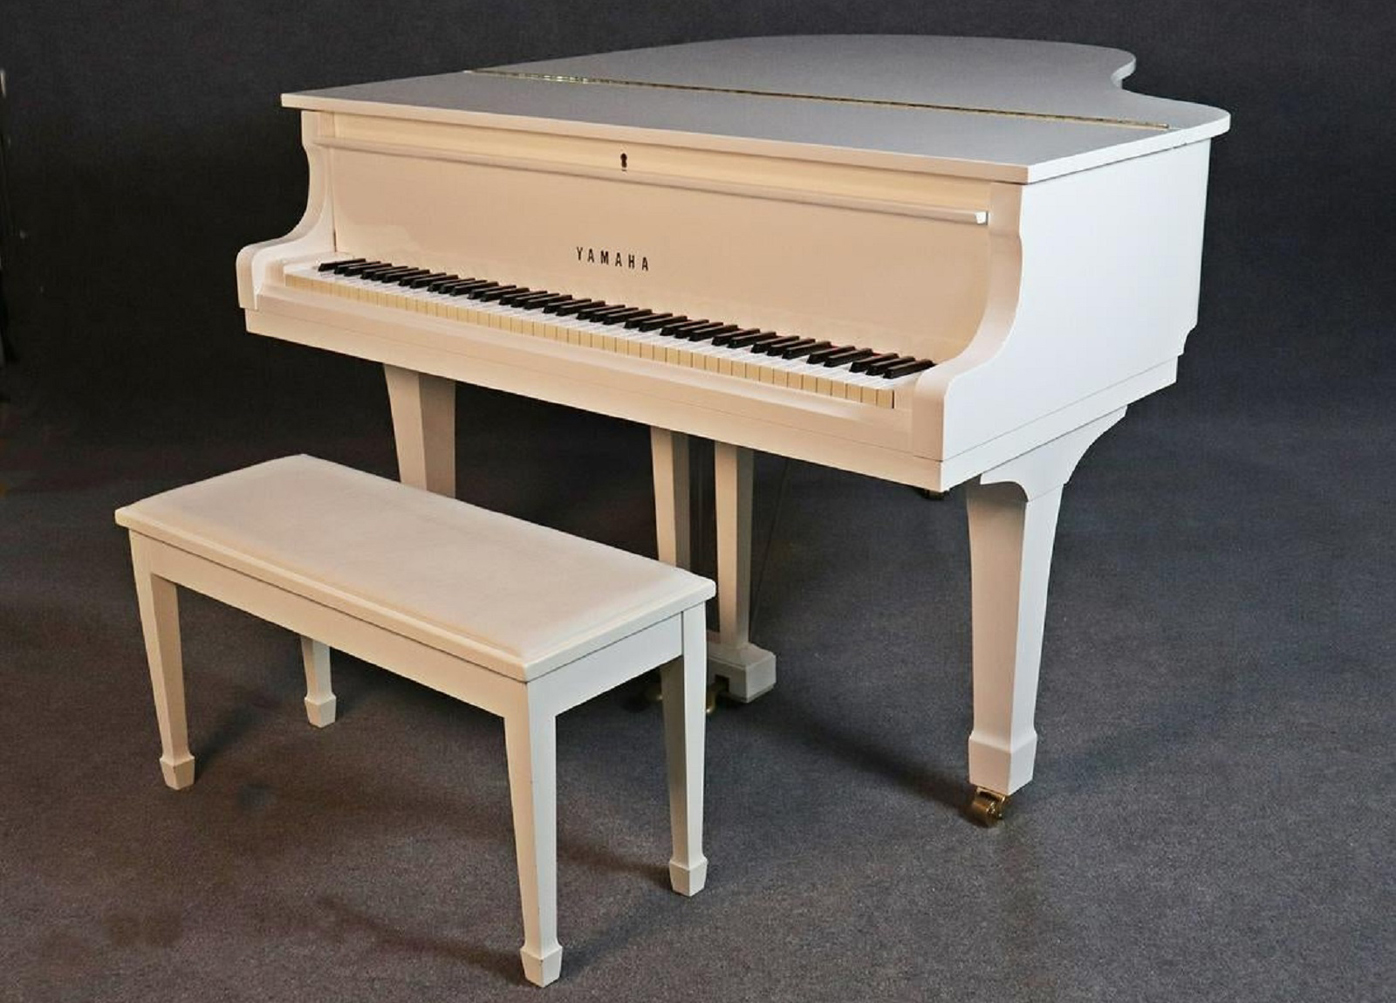 Sinatra's baby grand piano fetched more than A$10,000.